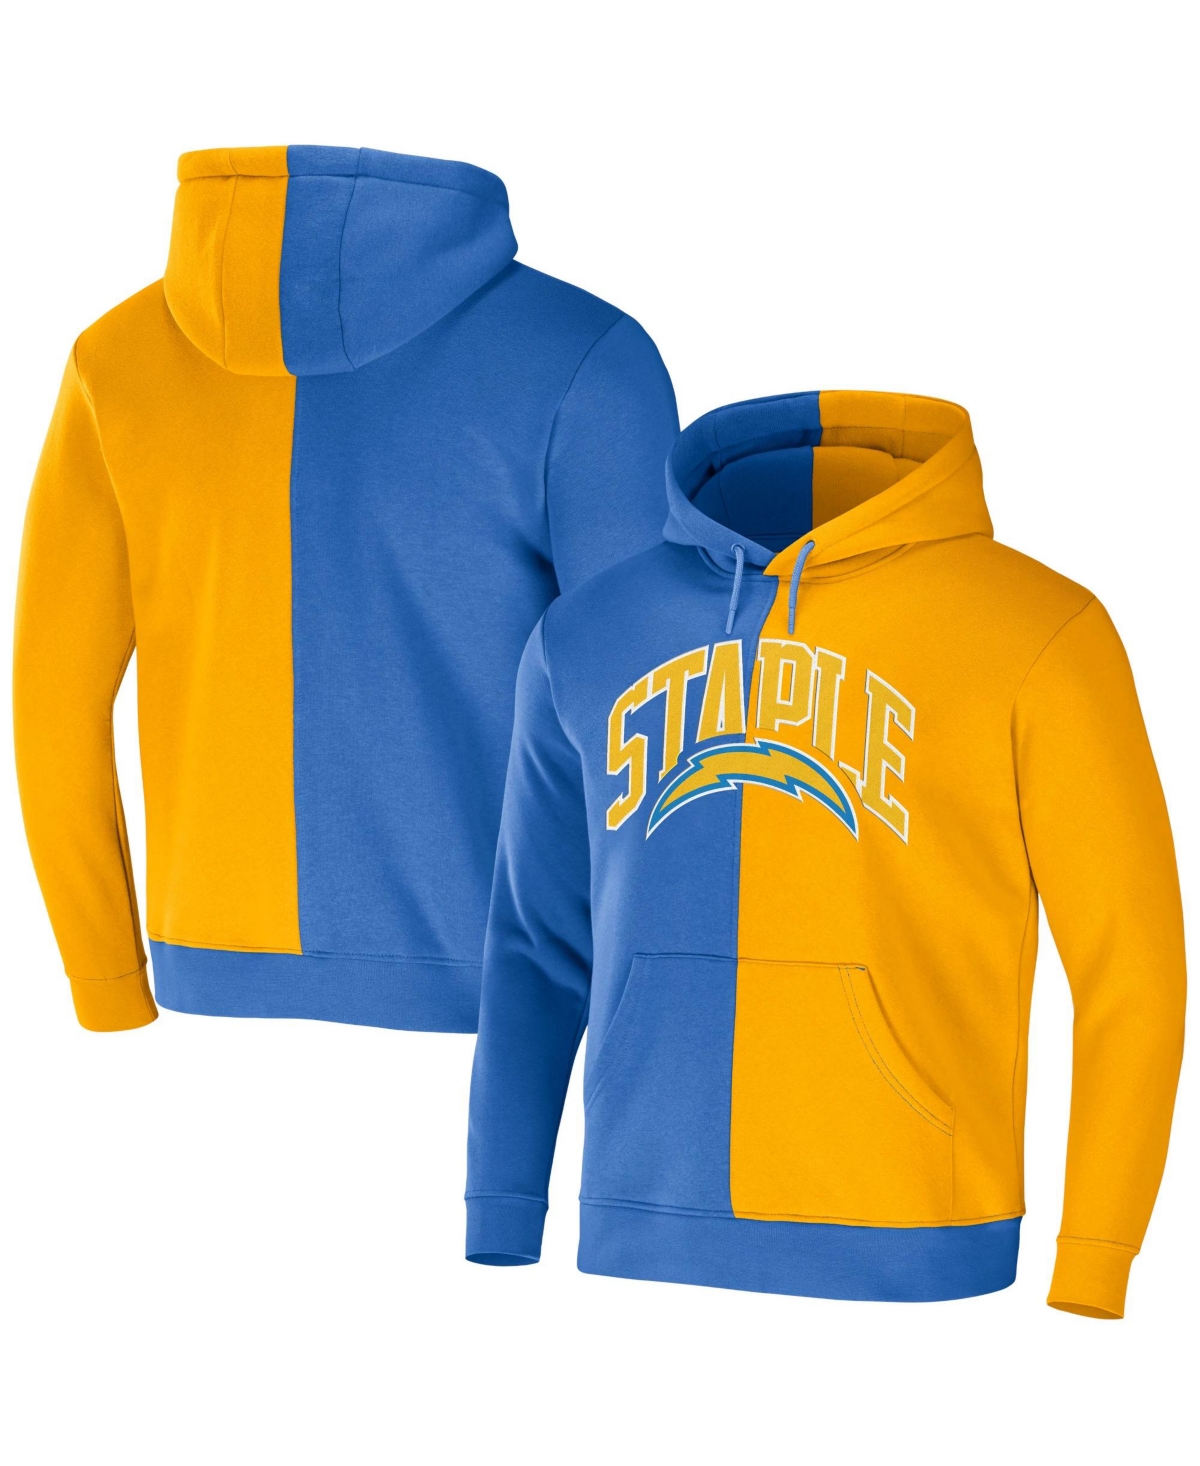 Men's Nfl X Staple Blue, Yellow Los Angeles Chargers Split Logo Pullover Hoodie - Blue, Yellow